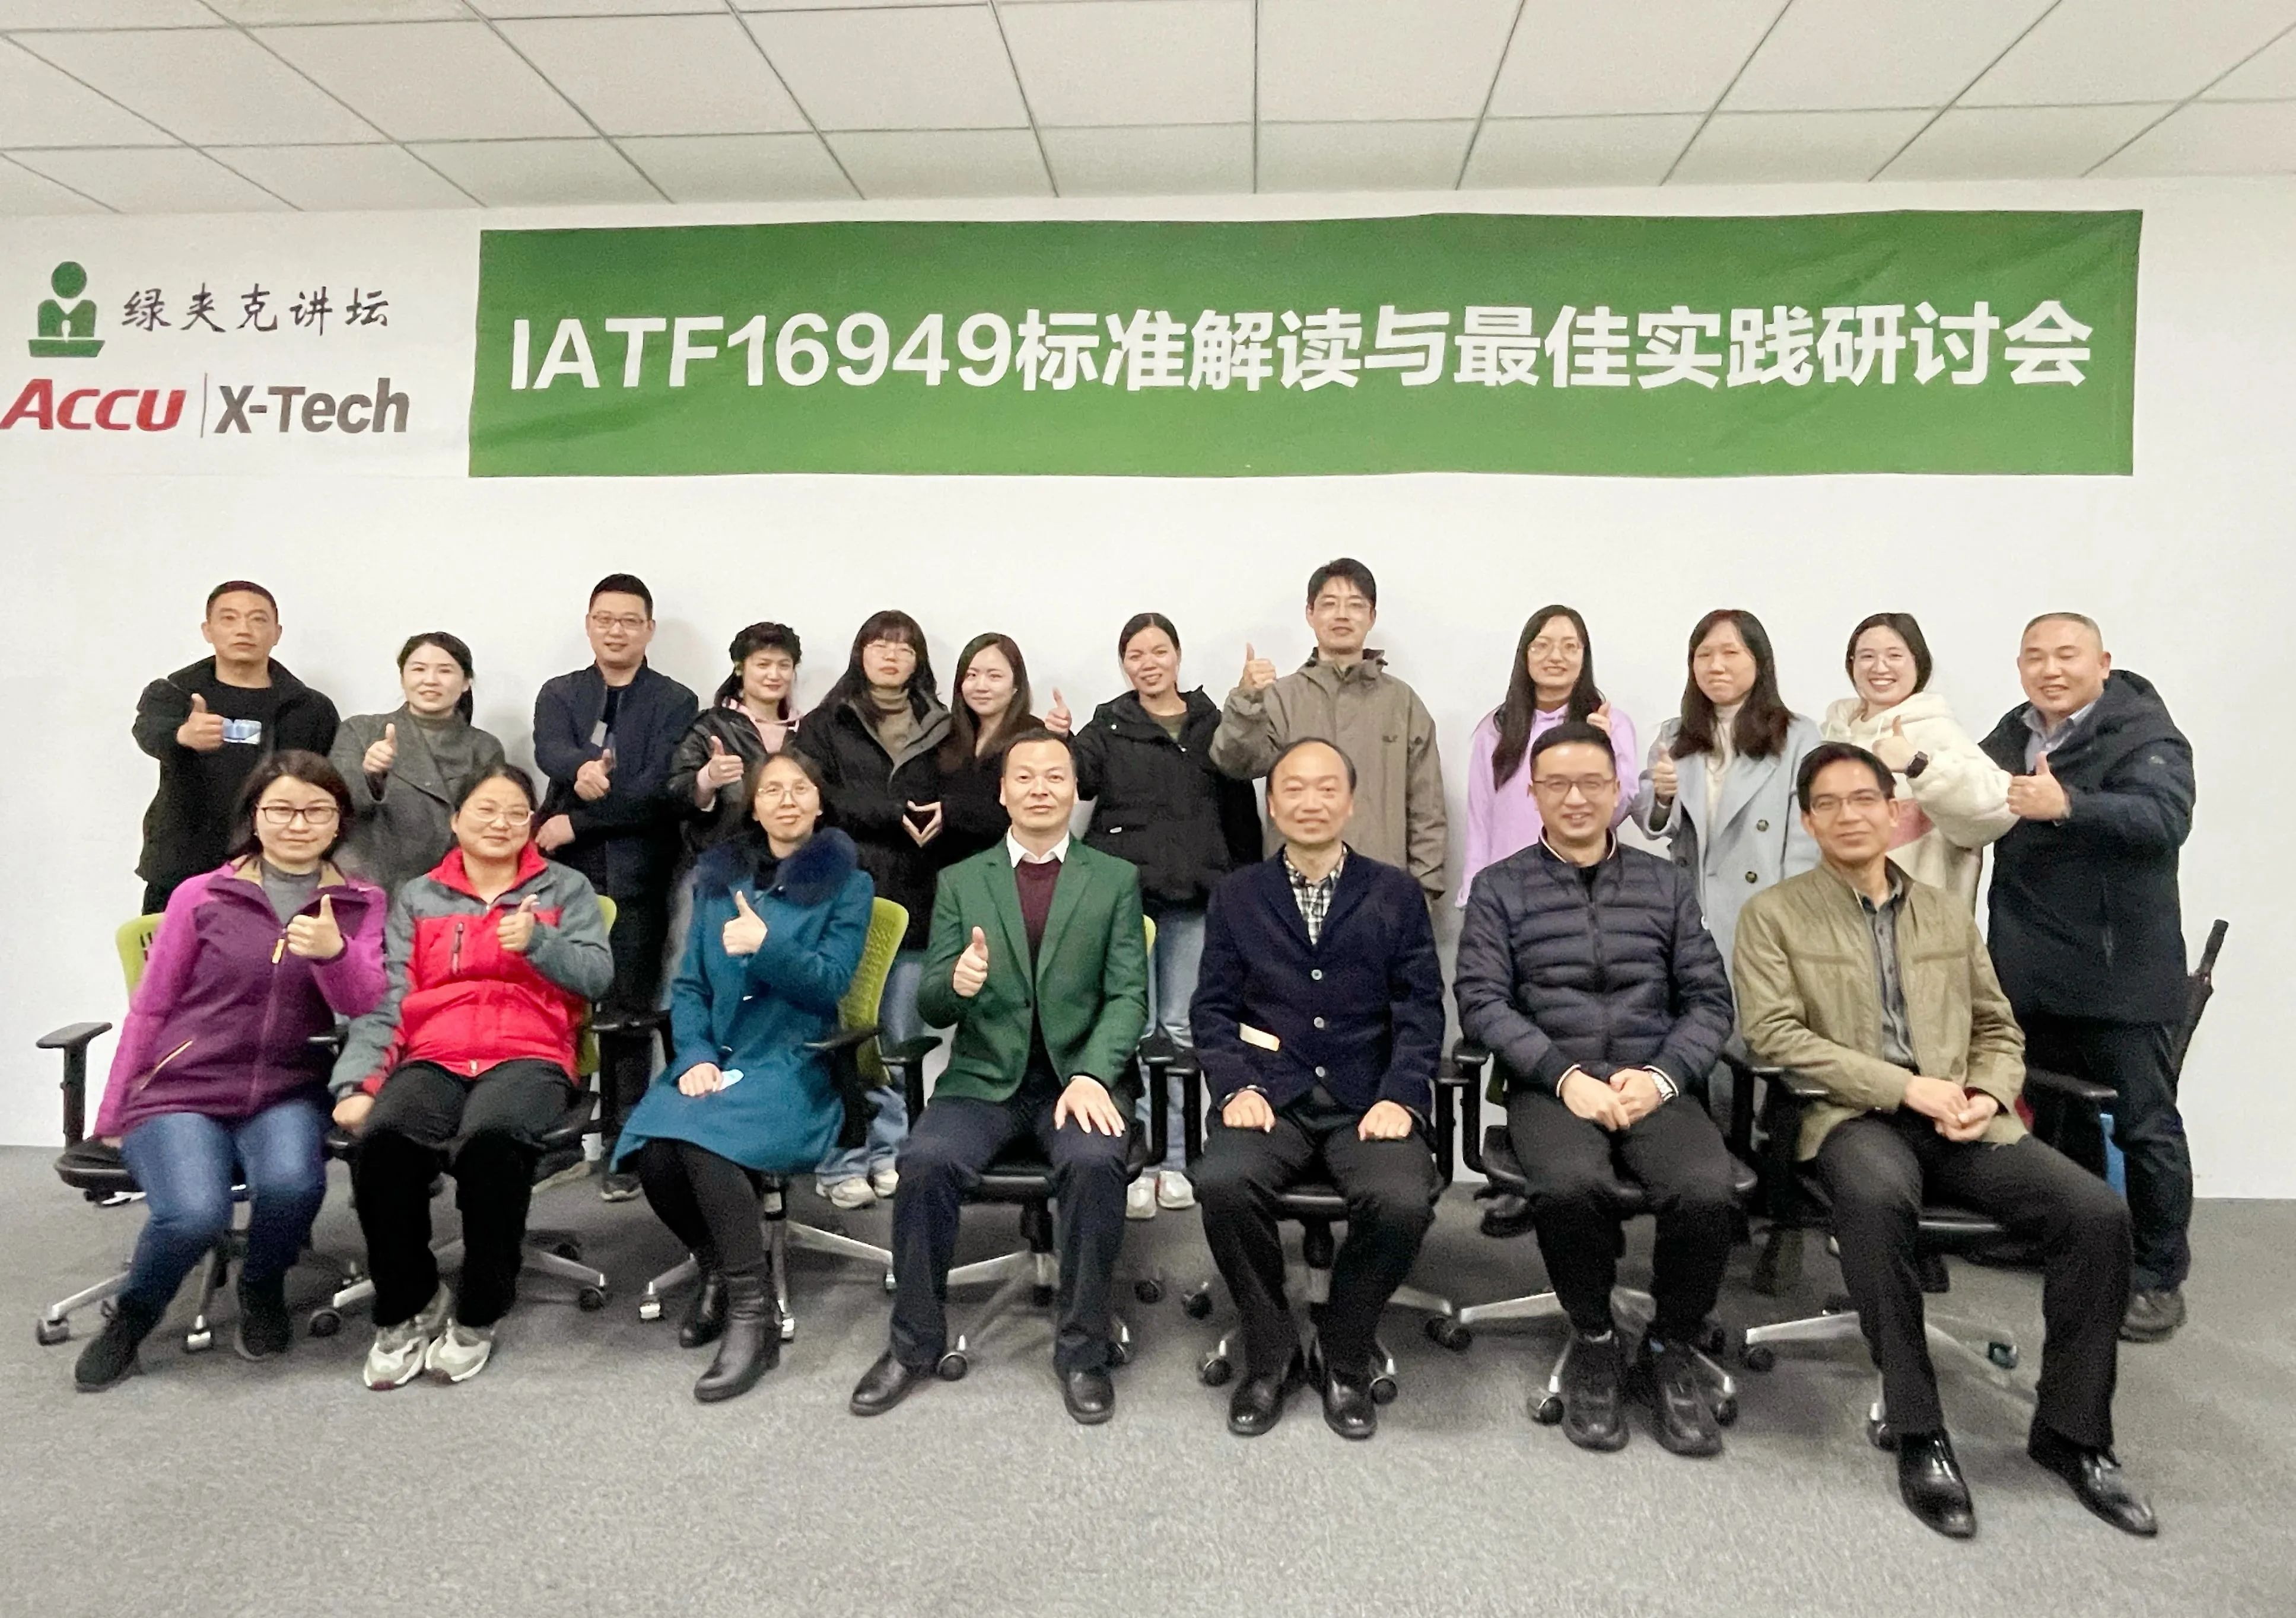 "IATF 16949 Solutions and Best Practices Seminar" was successfully held